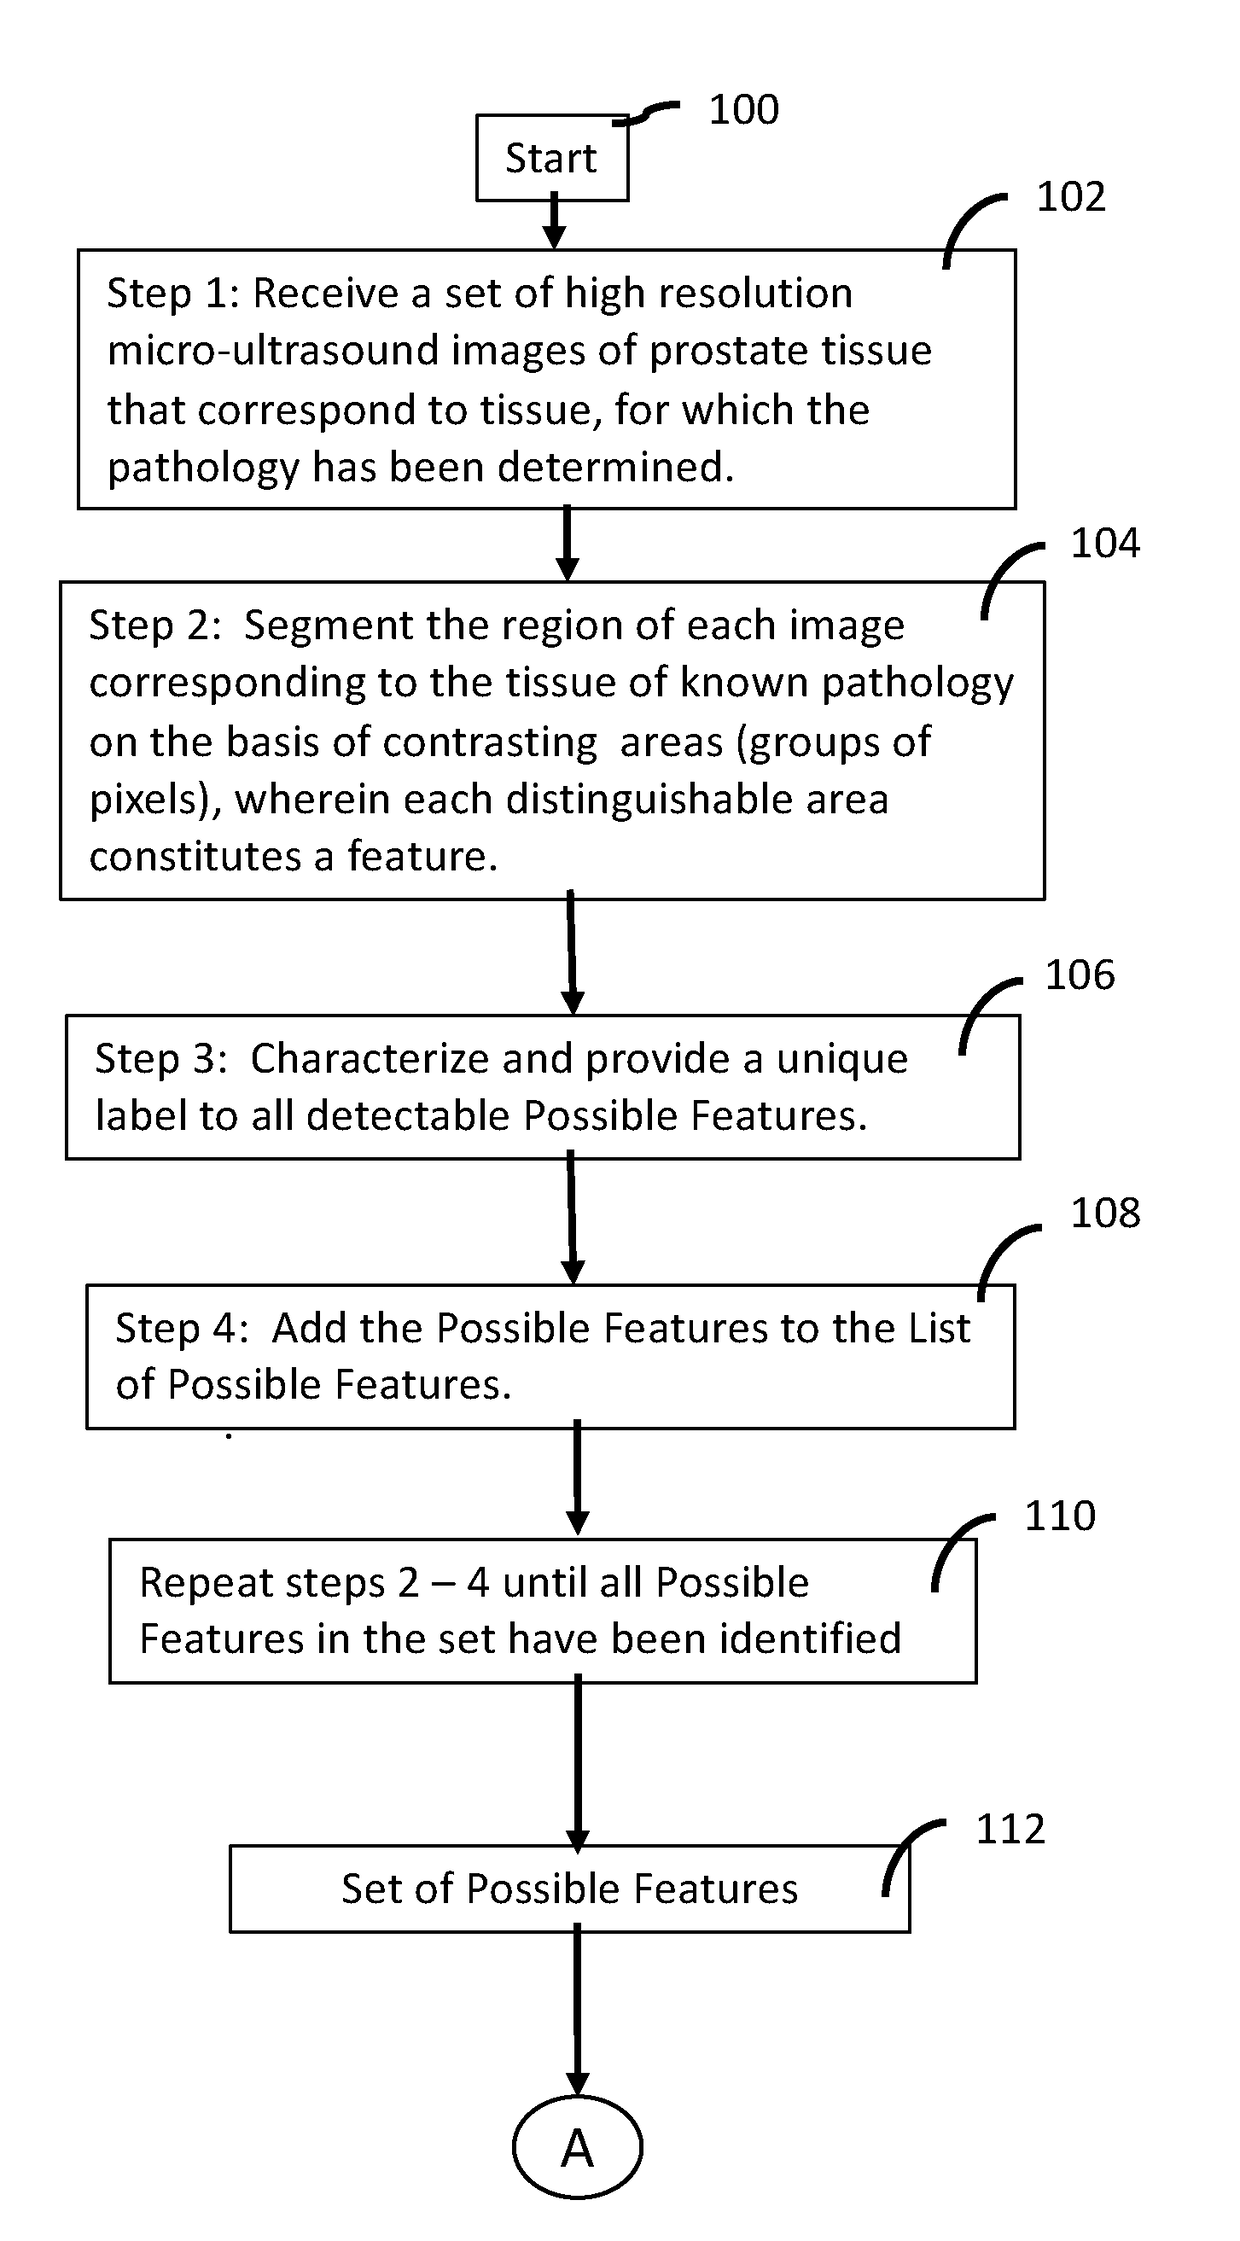 System comprising indicator features in high-resolution micro-ultrasound images